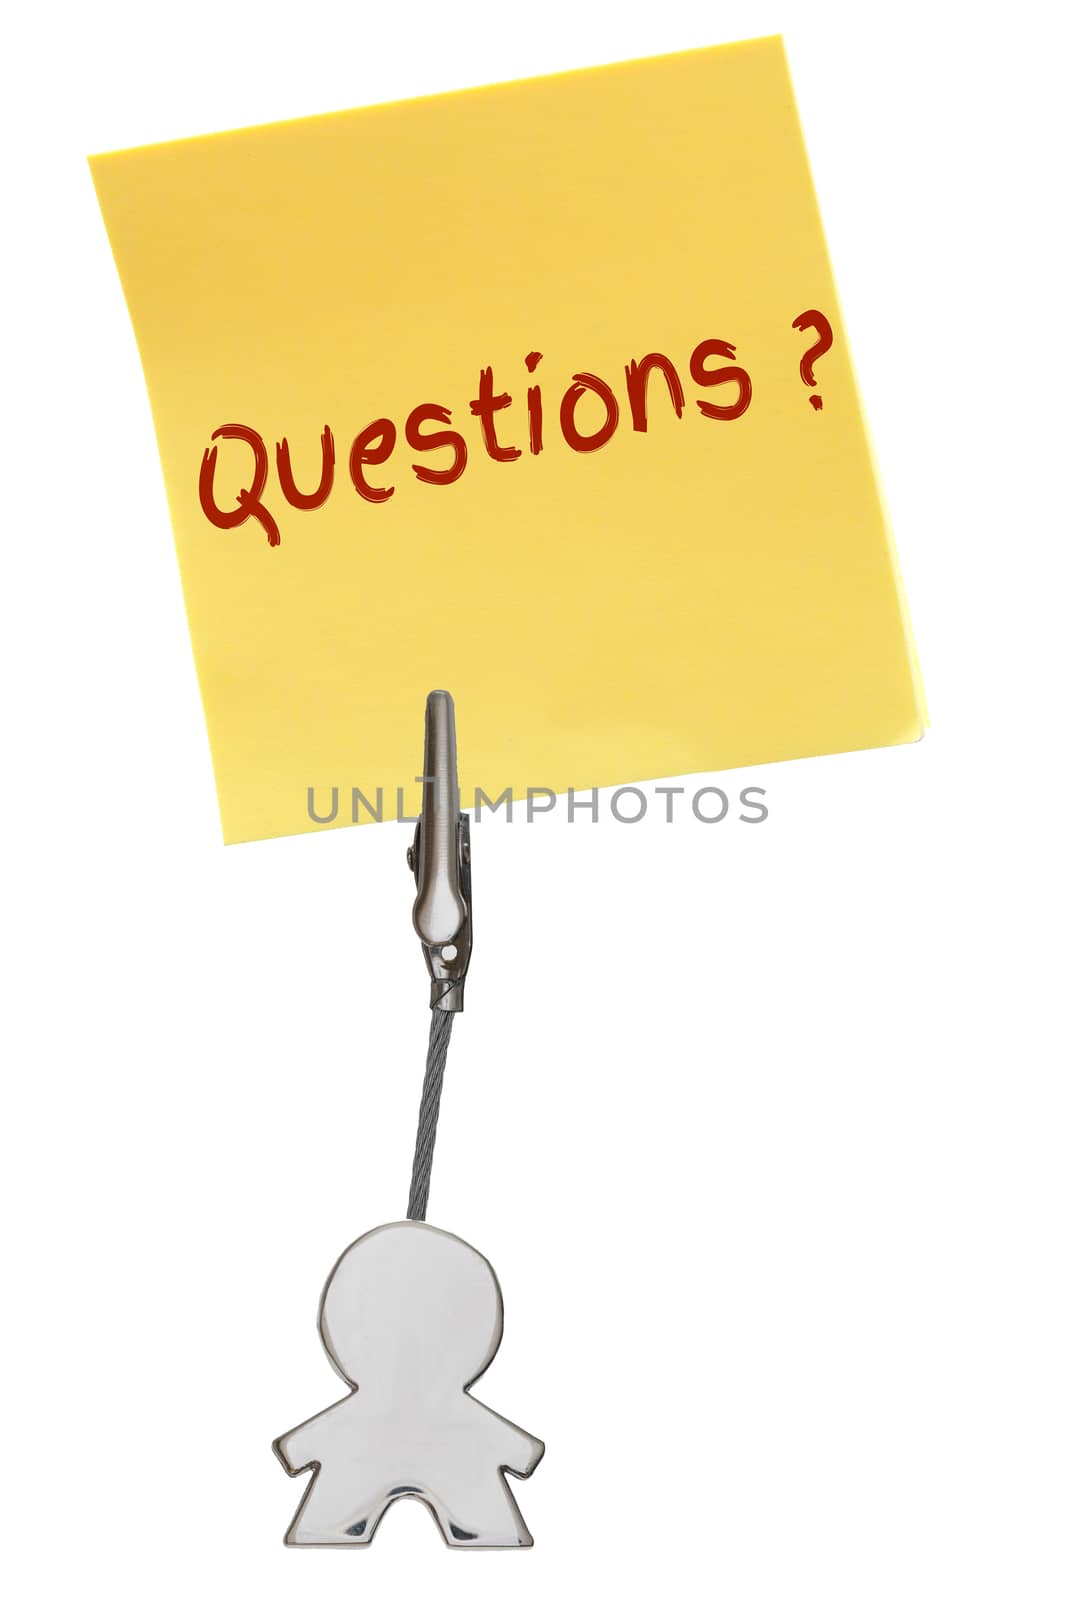 Man Figure Business Card Holder with yellow paper note QUESTIONS by asafaric